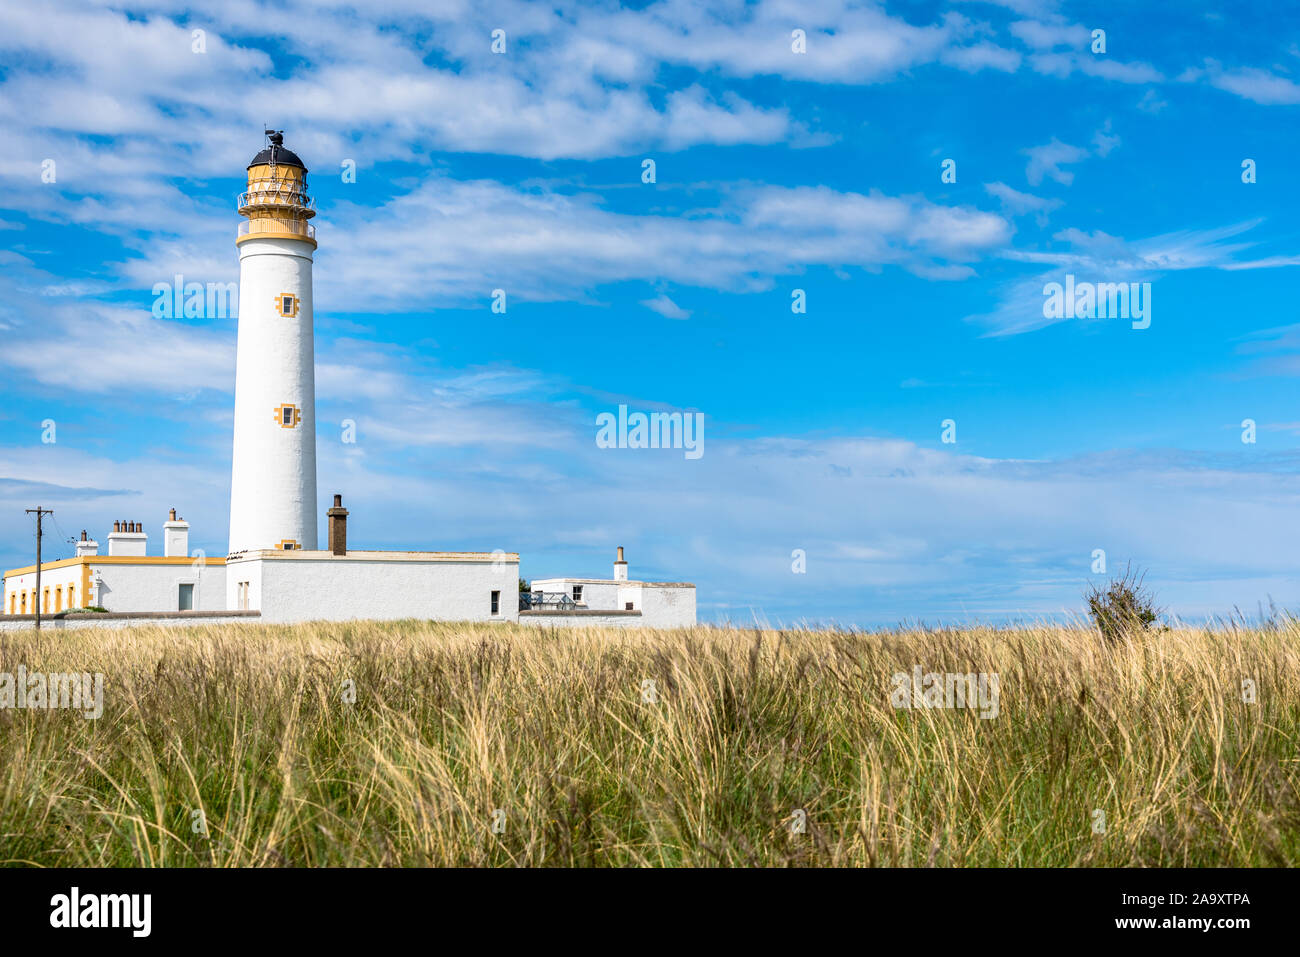 Barns Ness Lighthouse on the East coast of Scotland and blue sky with clouds Stock Photo